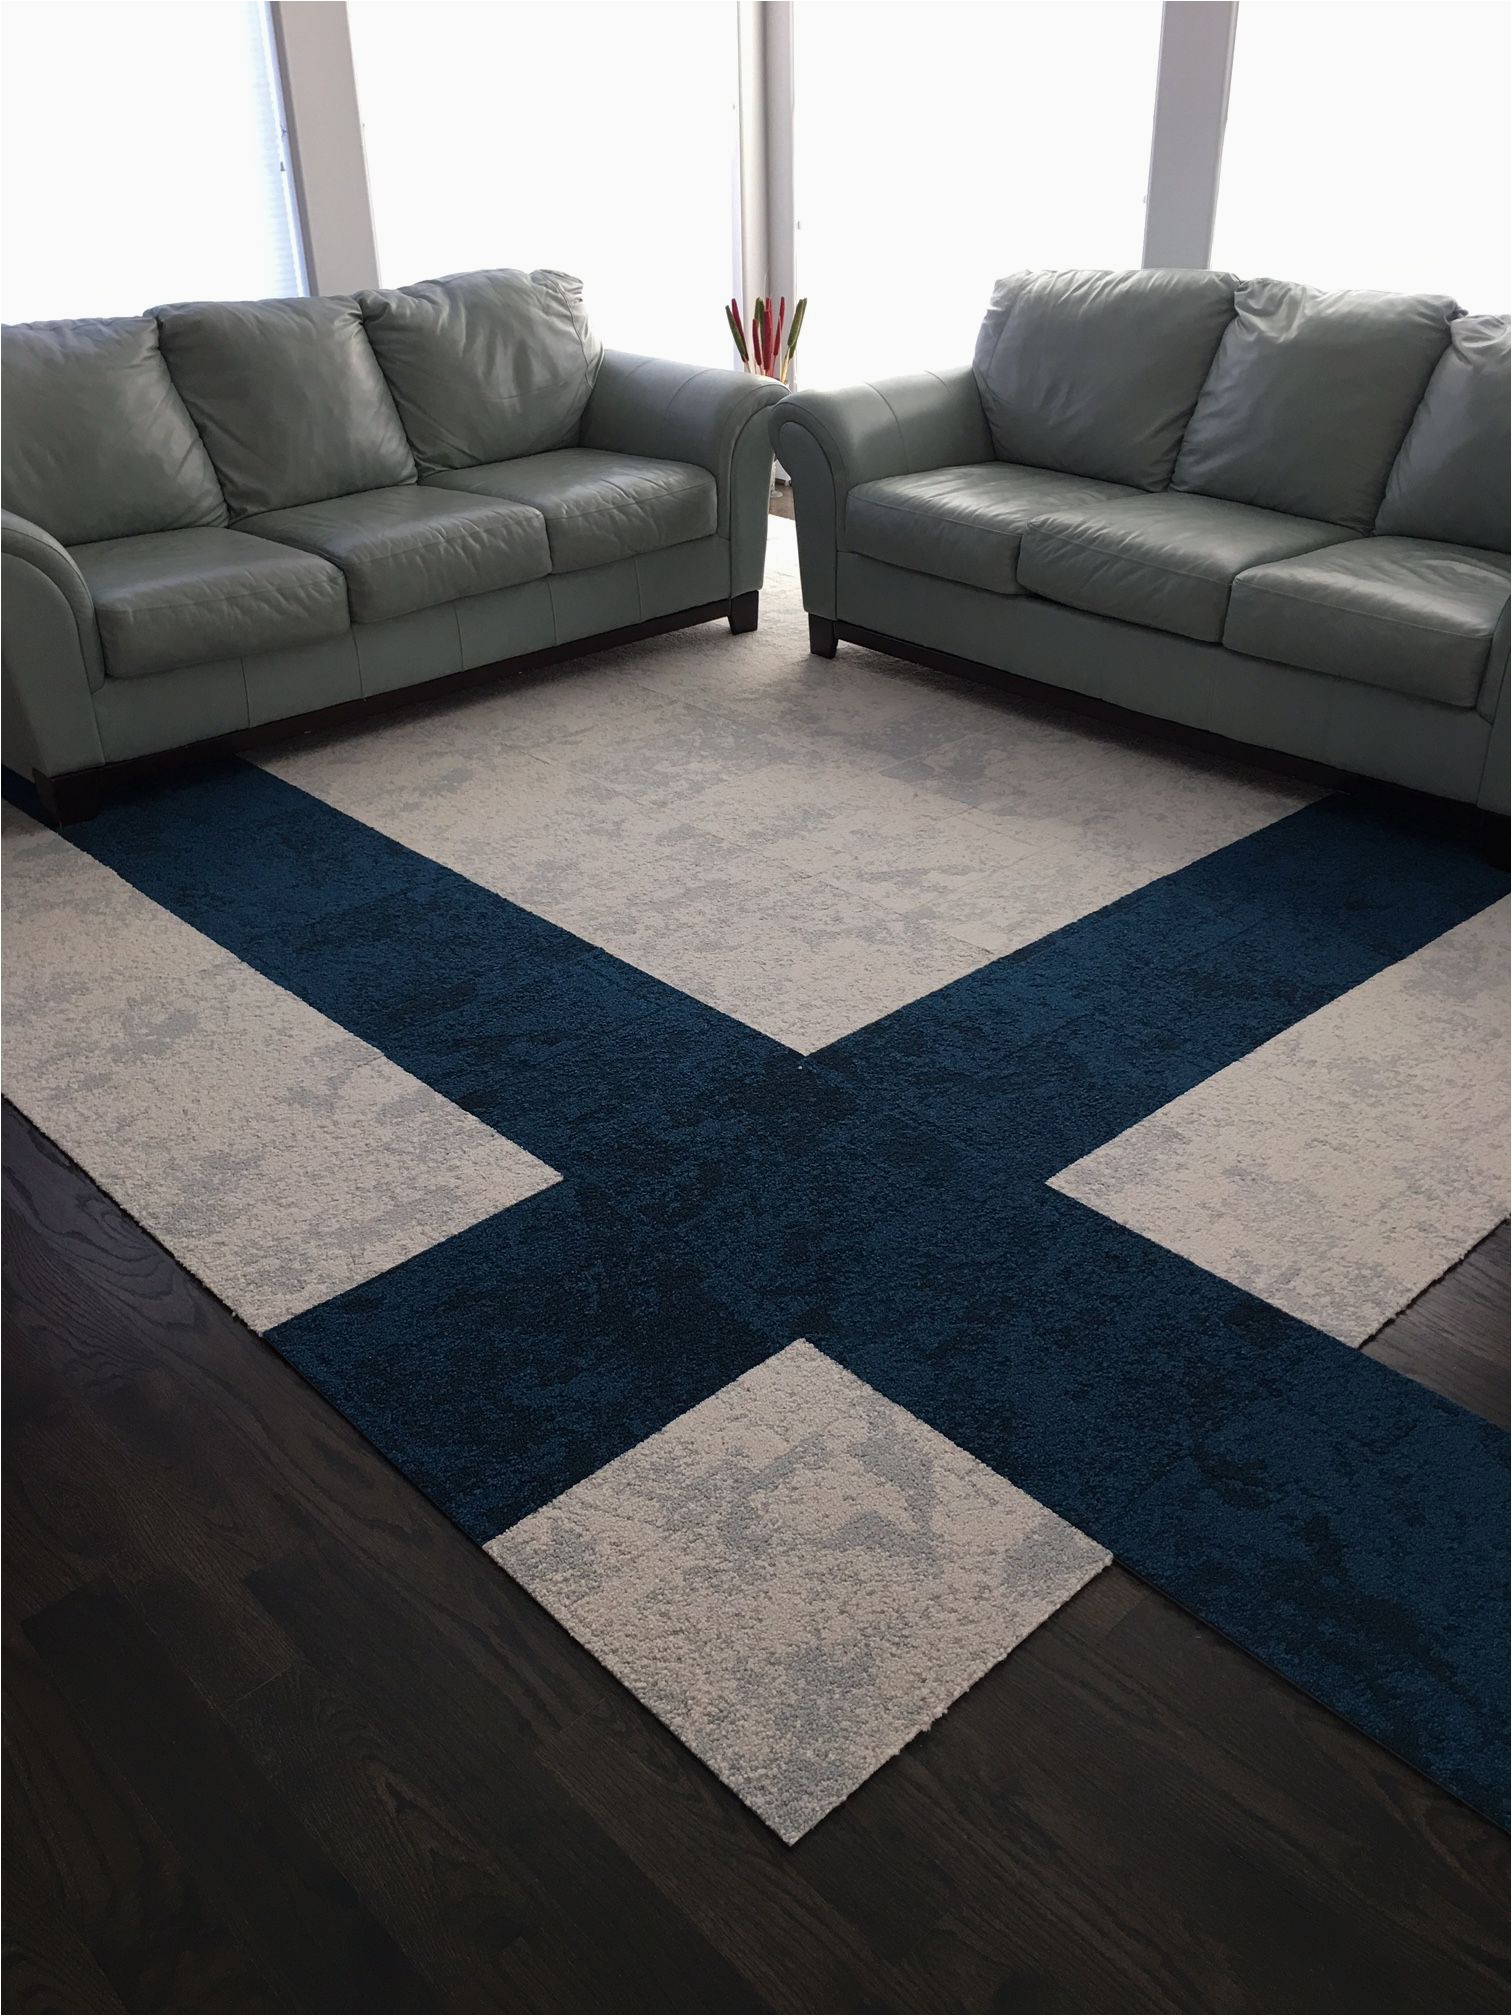 Carpet Tiles to Make area Rug Add Simple Lines to the Rug and Make Your Space Great